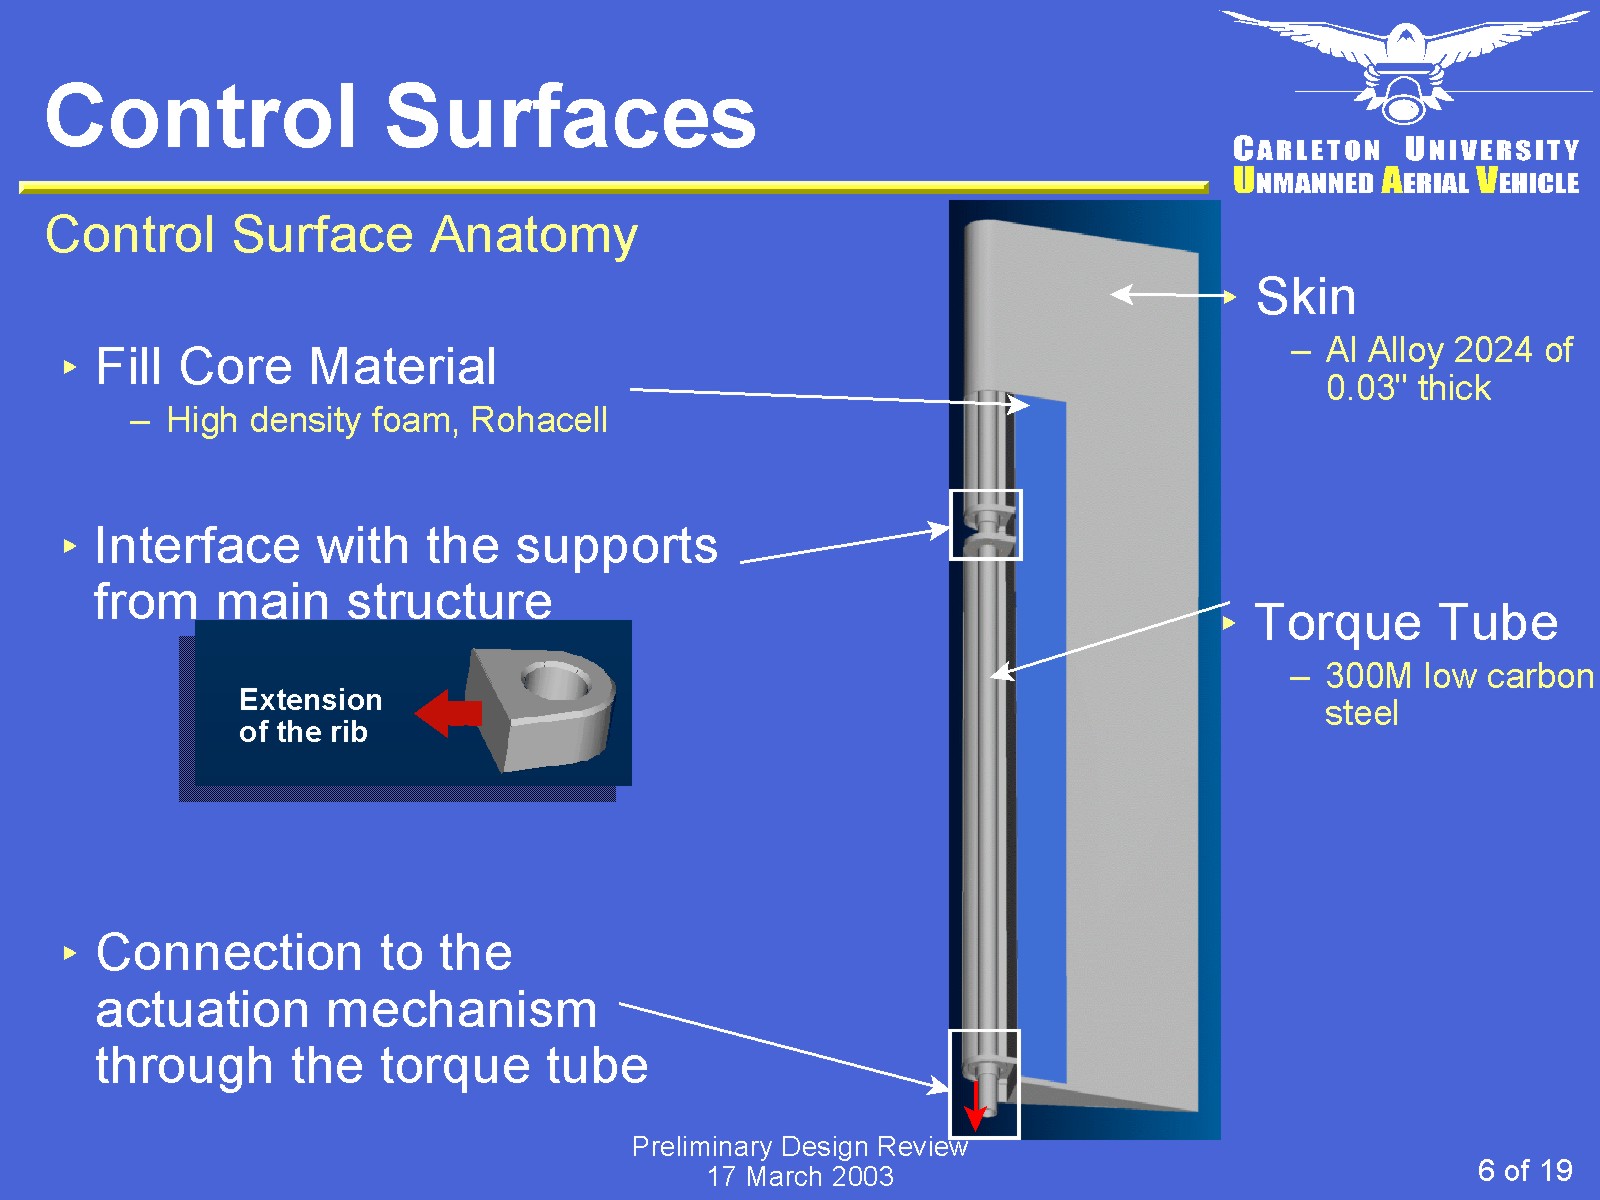 Control Surface Structural Material